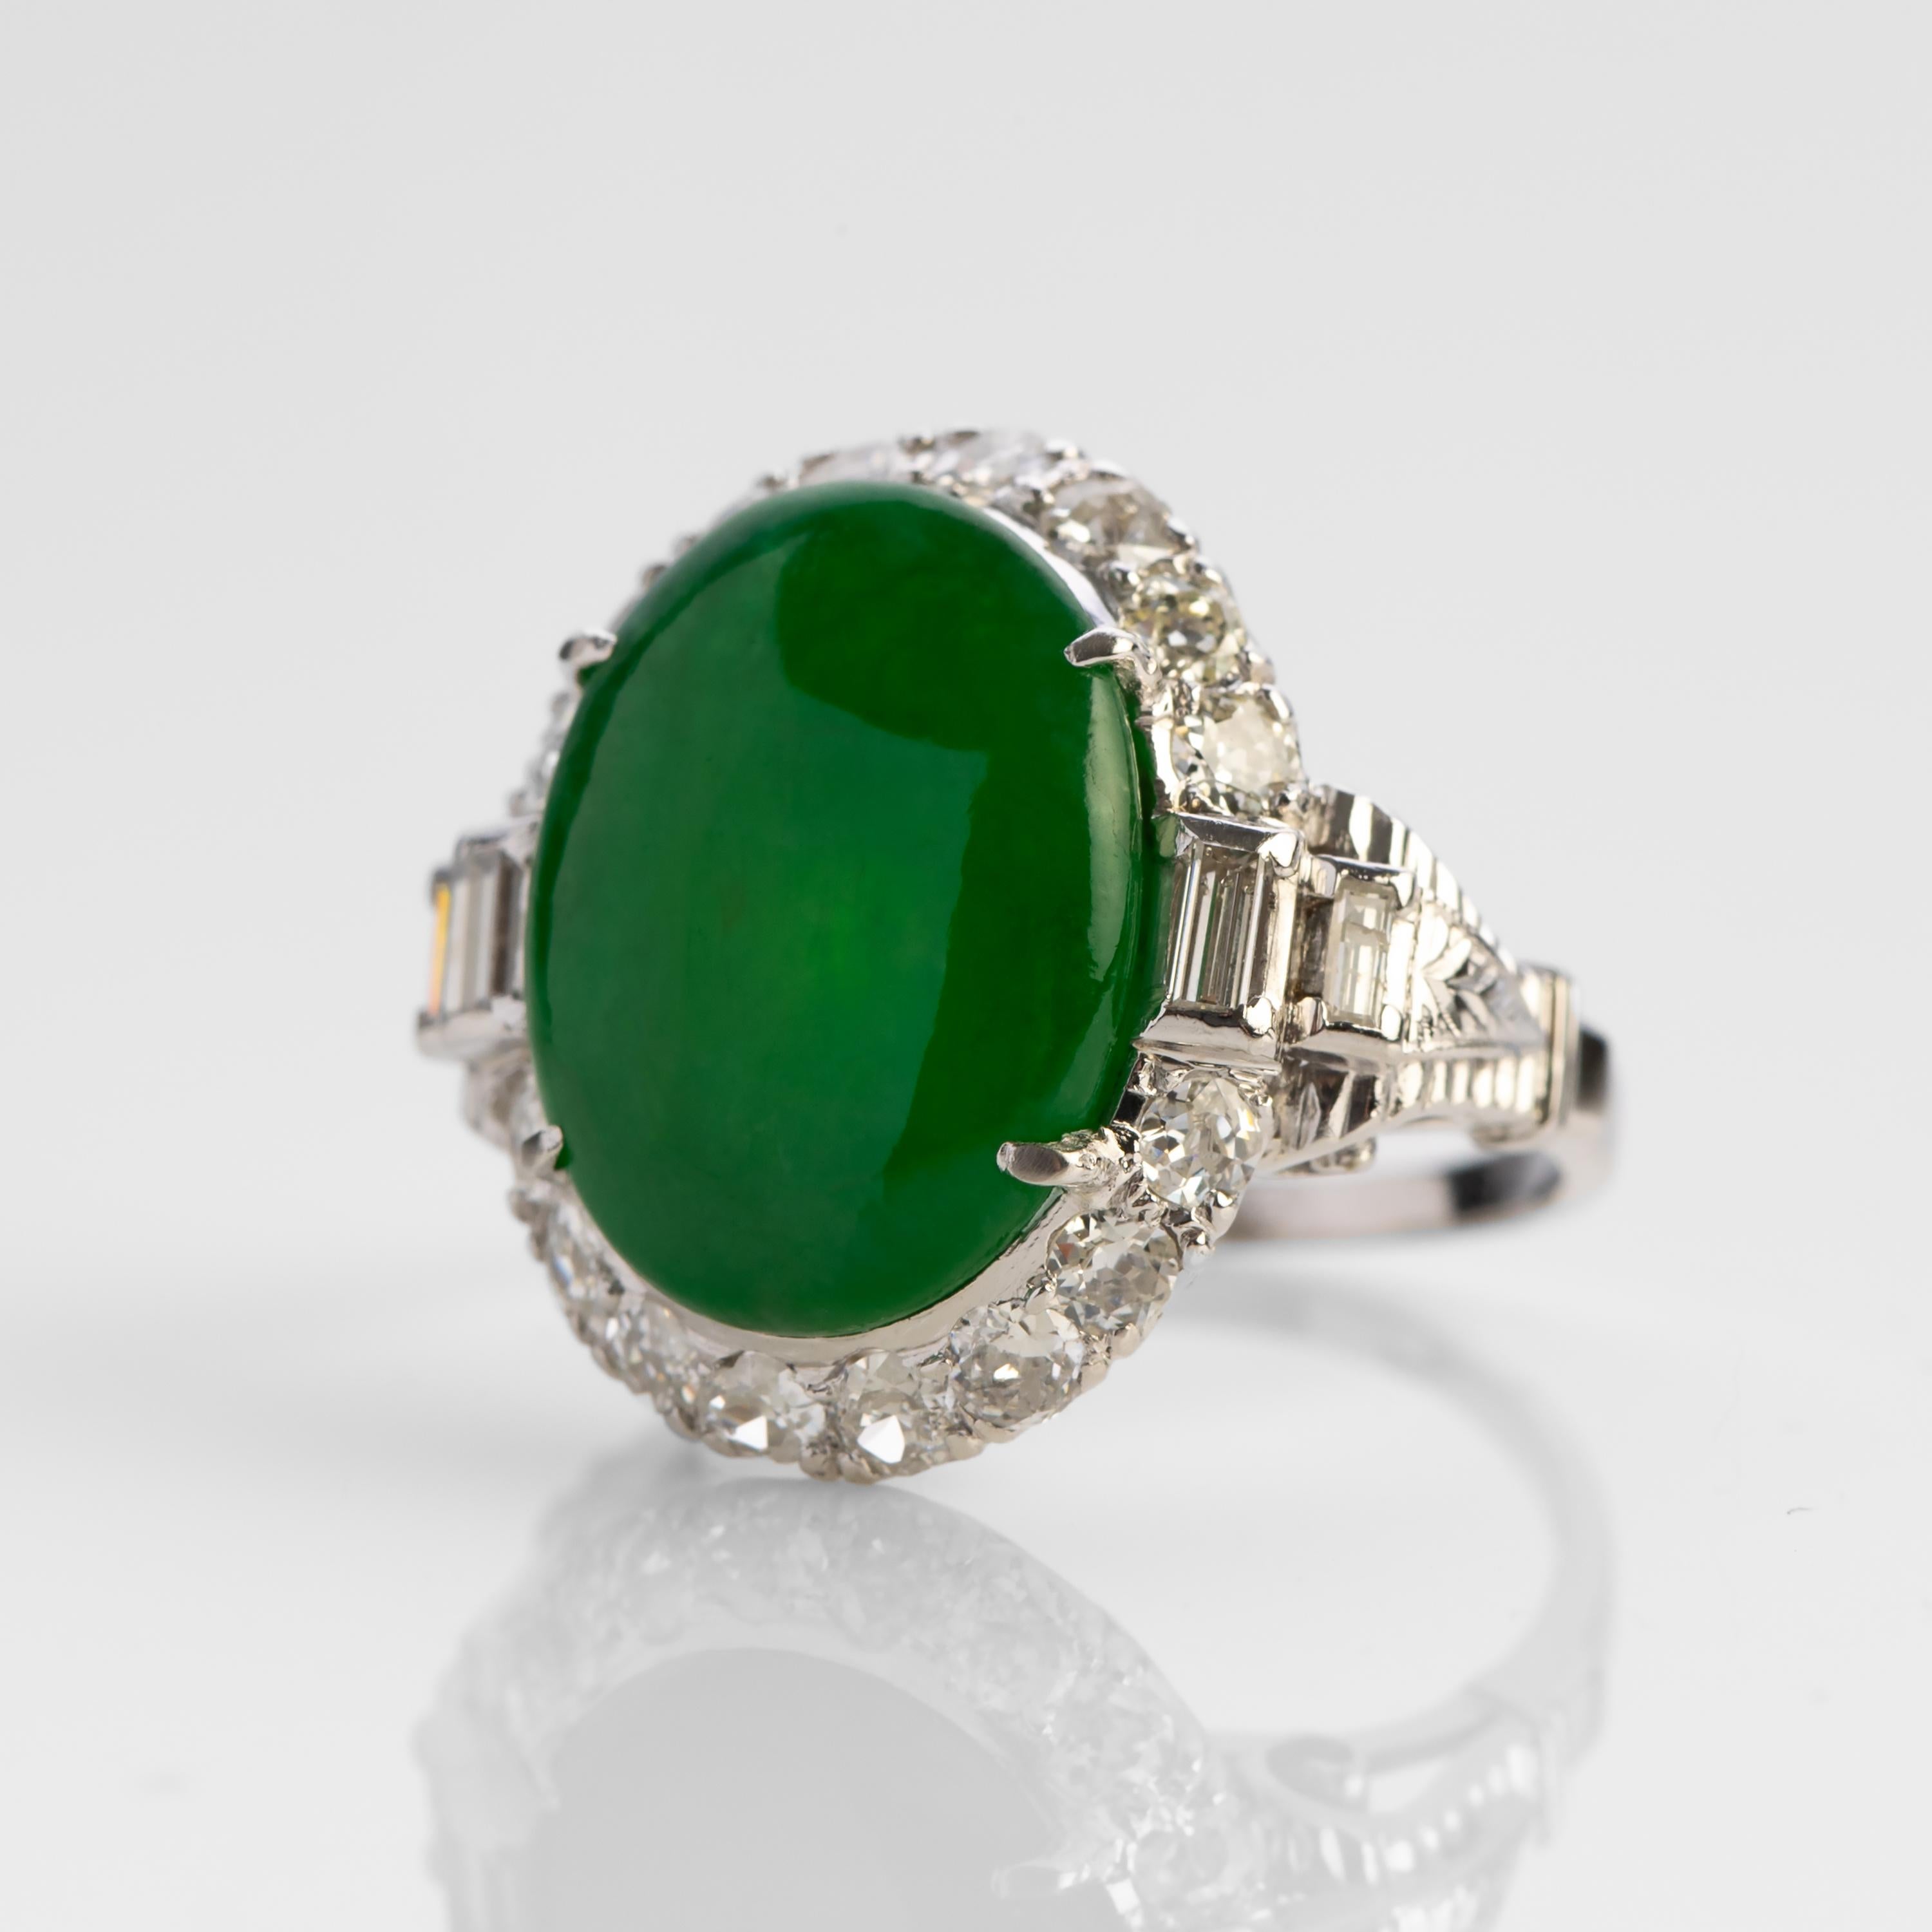 Women's or Men's Imperial Jade Ring GIA Certified Untreated, circa 1950